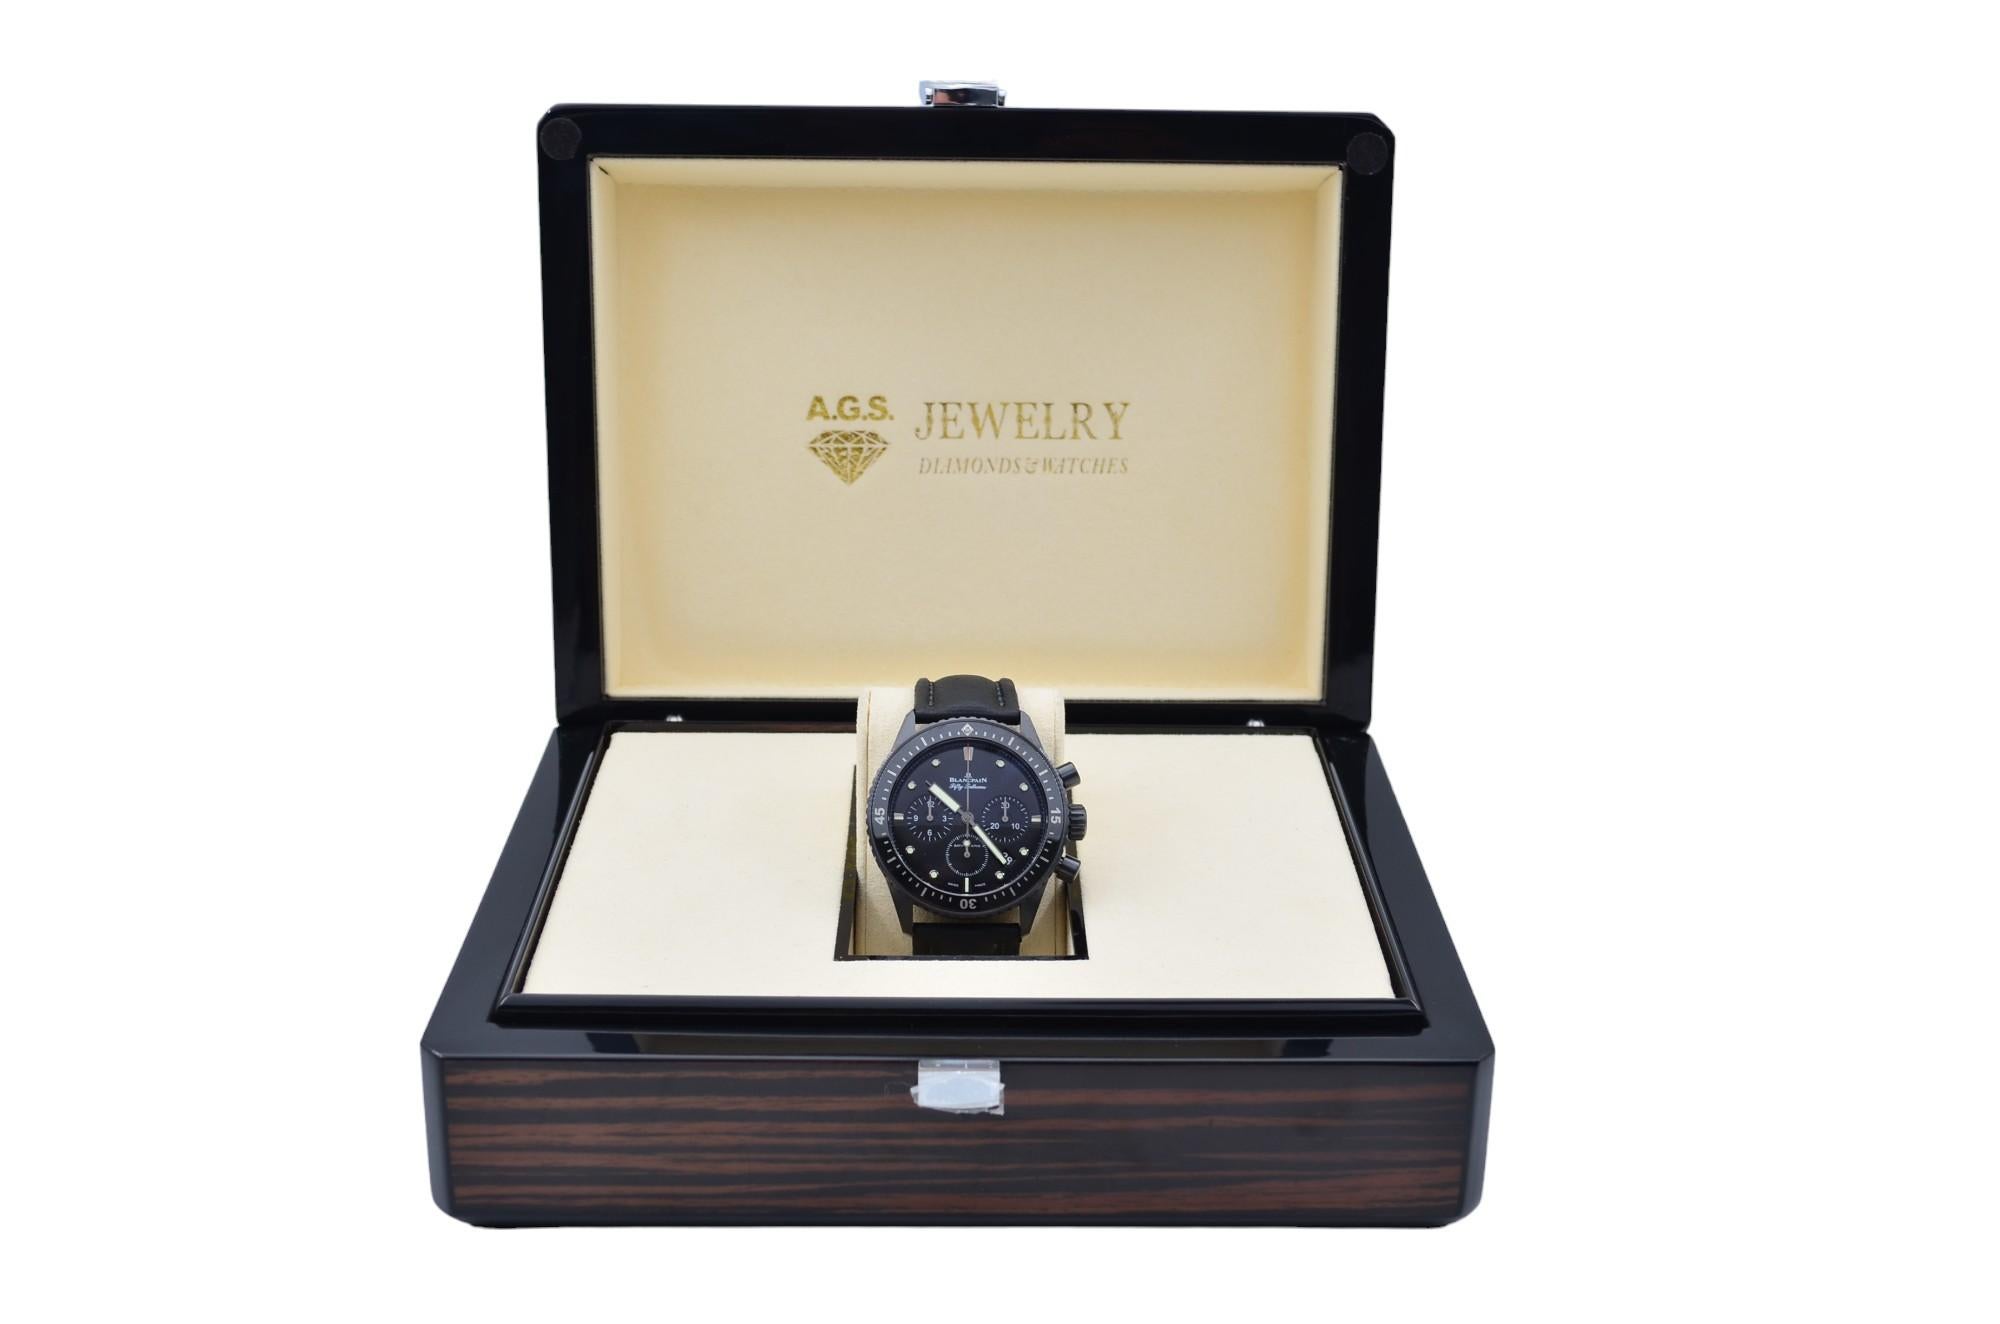 The watch is in a very good condition and it’s working well. The watch comes with an AGS Jewelry wooden box, along with an AGS Jewelry warranty card. For more information about delivery, warranty and return, please check our terms&conditions